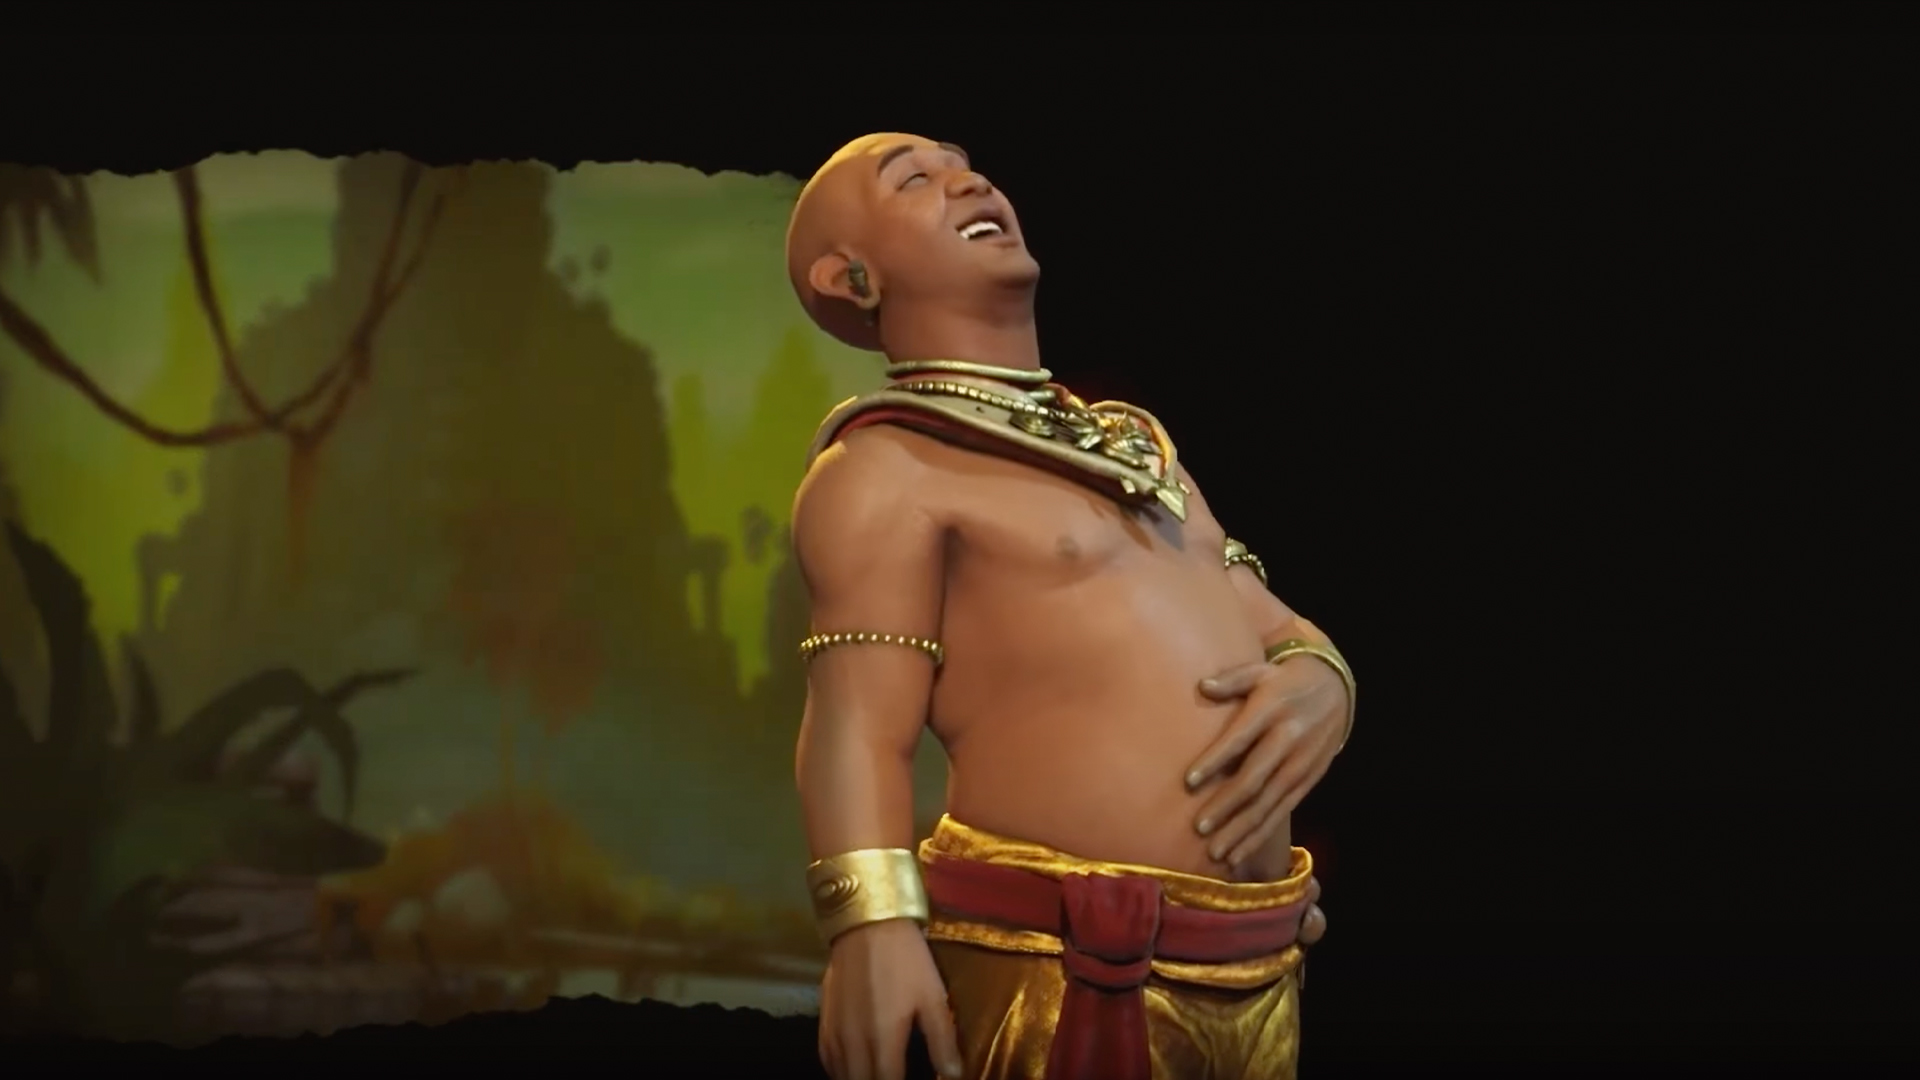 Civilization 6’s AI has been going mad for science thanks to a few lines of code